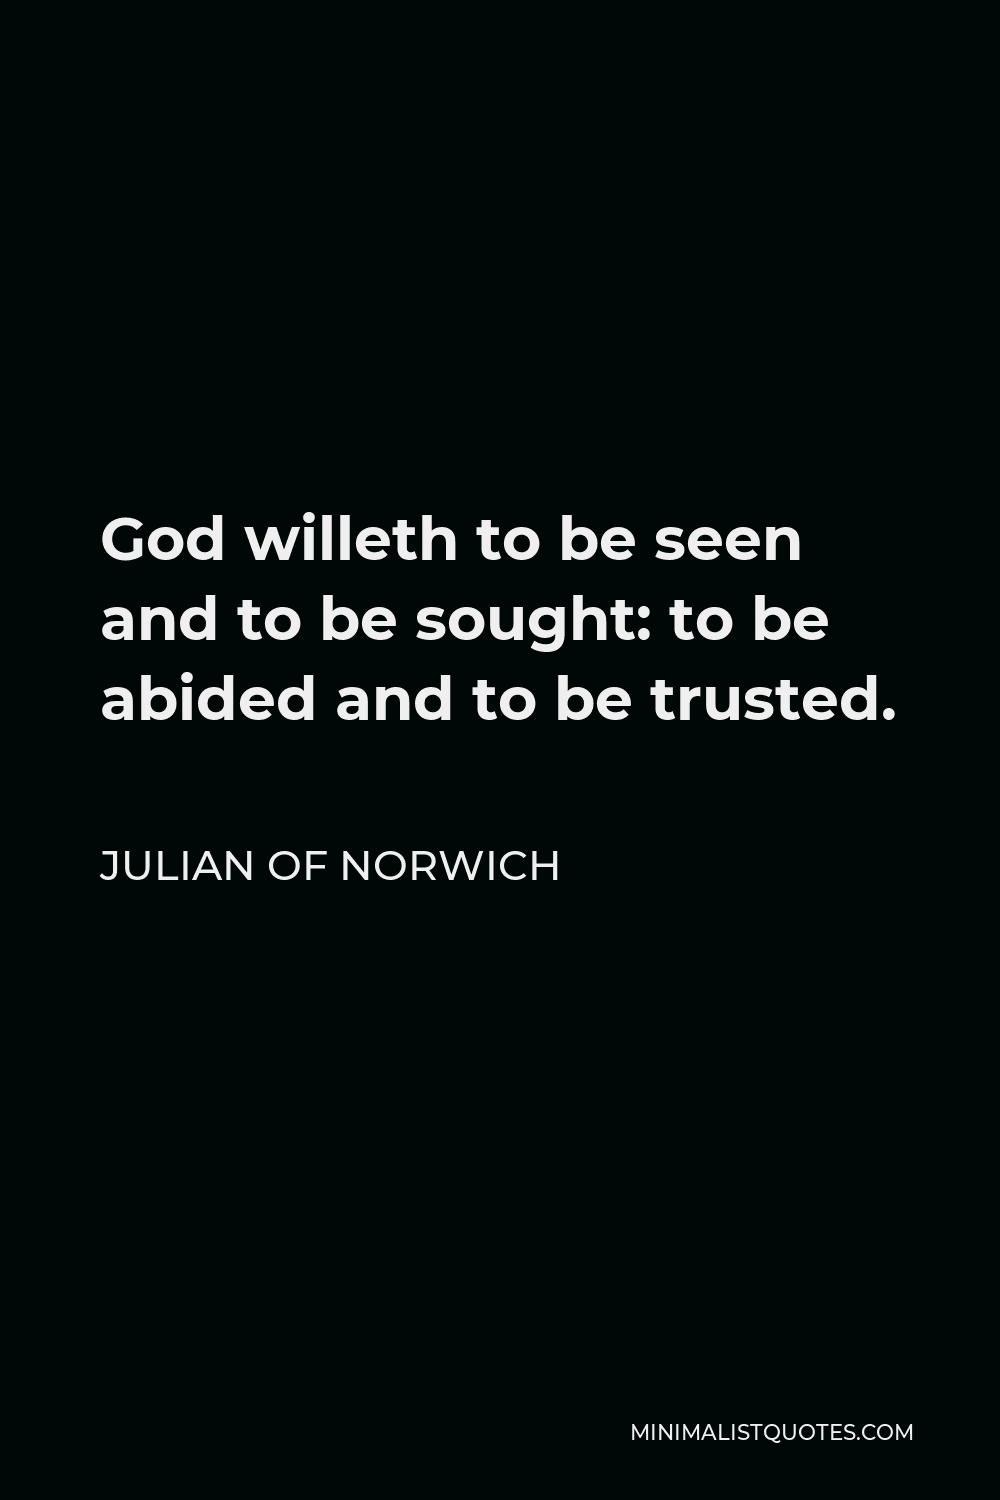 Julian of Norwich Quote - God willeth to be seen and to be sought: to be abided and to be trusted.